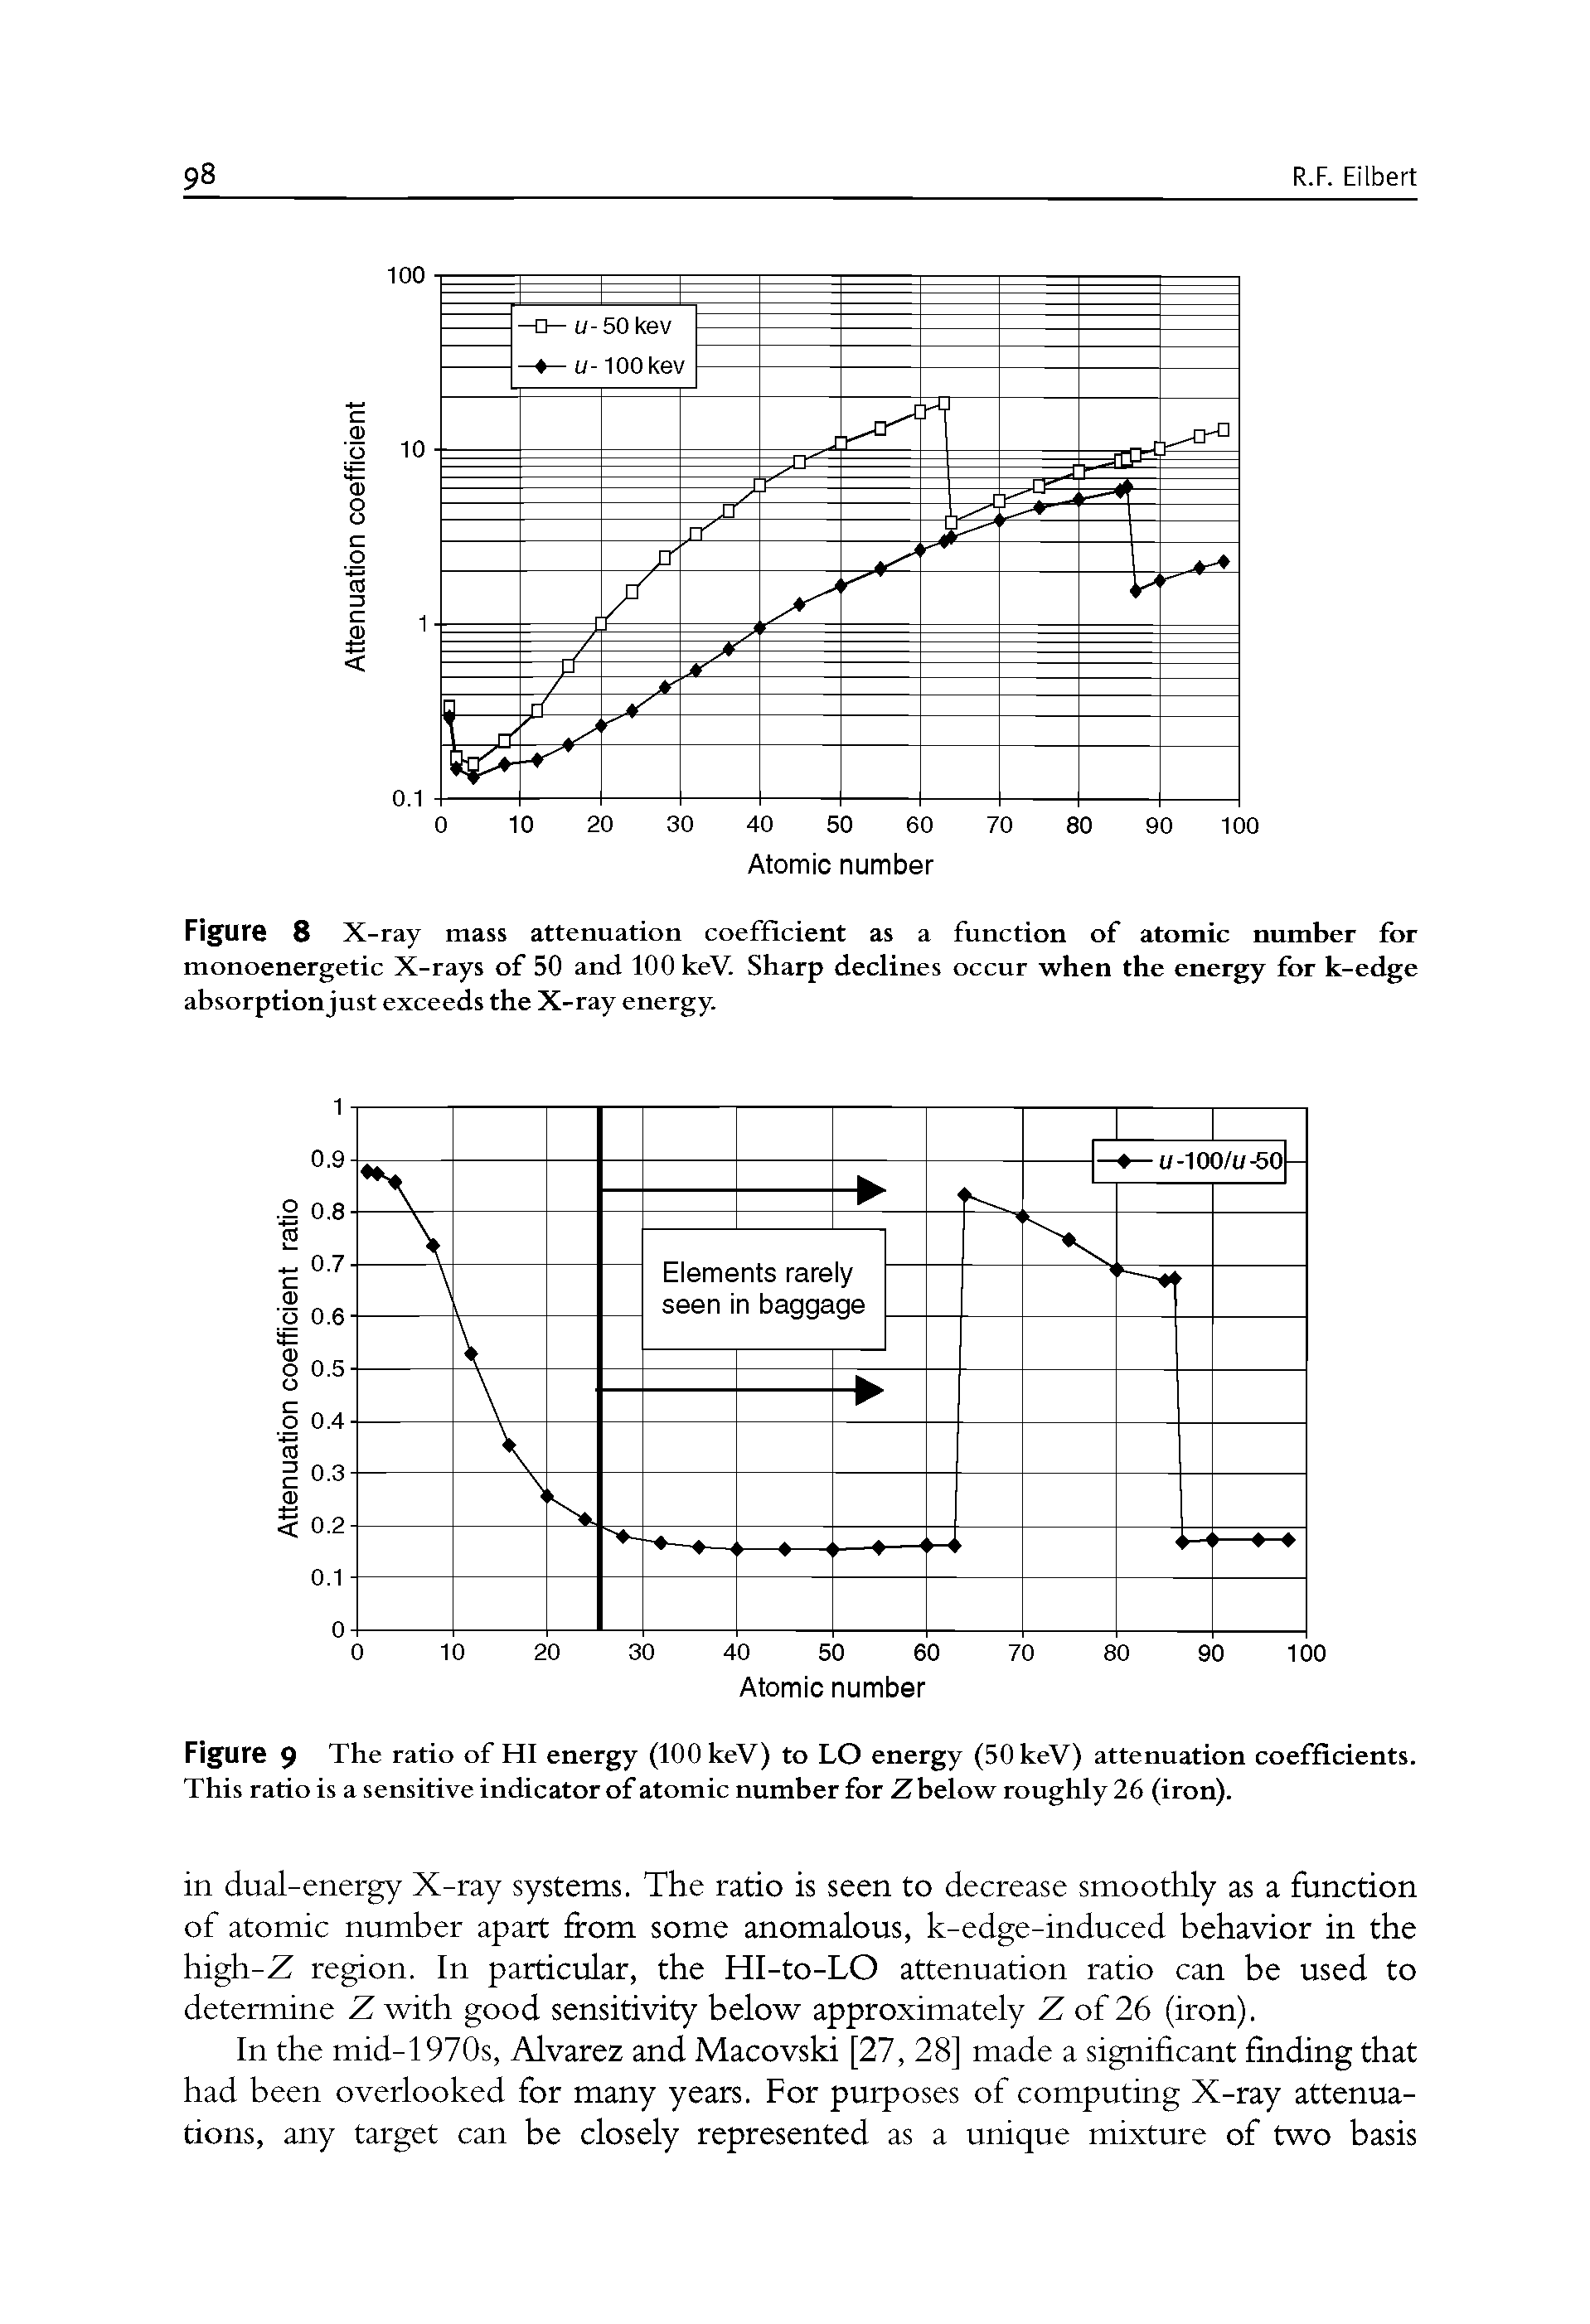 Figure 8 X-ray mass attenuation coefficient as a function of atomic number for monoenergetic X-rays of 50 and 100 keV. Sharp declines occur when the energy for k-edge absorptionjust exceeds the X-ray energy.